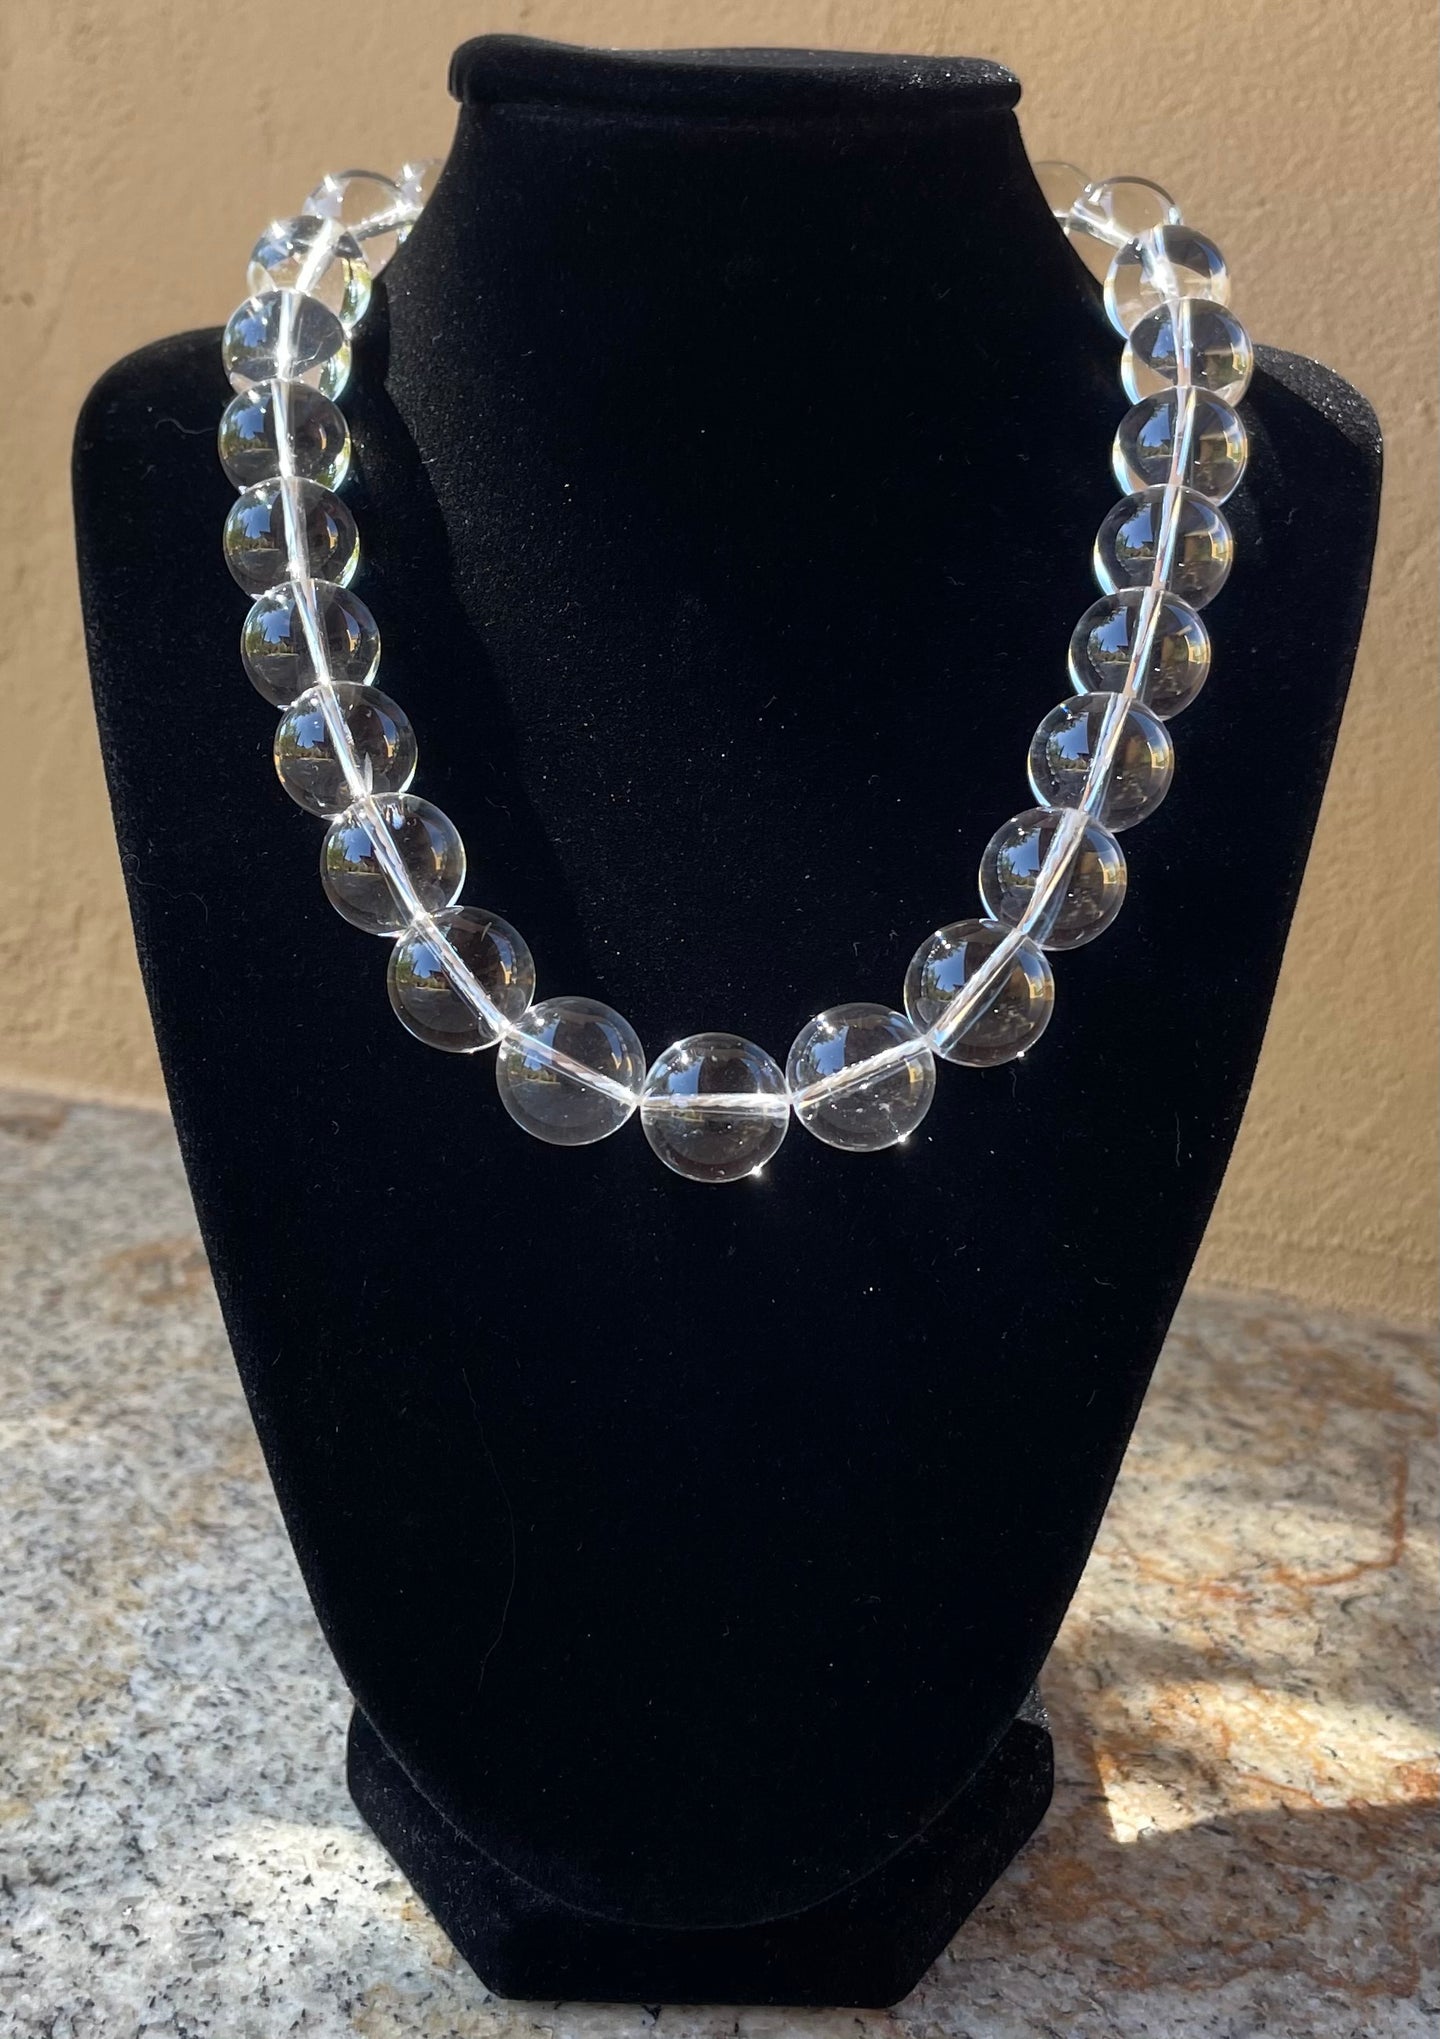 Necklace - large glass beads with sterling silver toggle